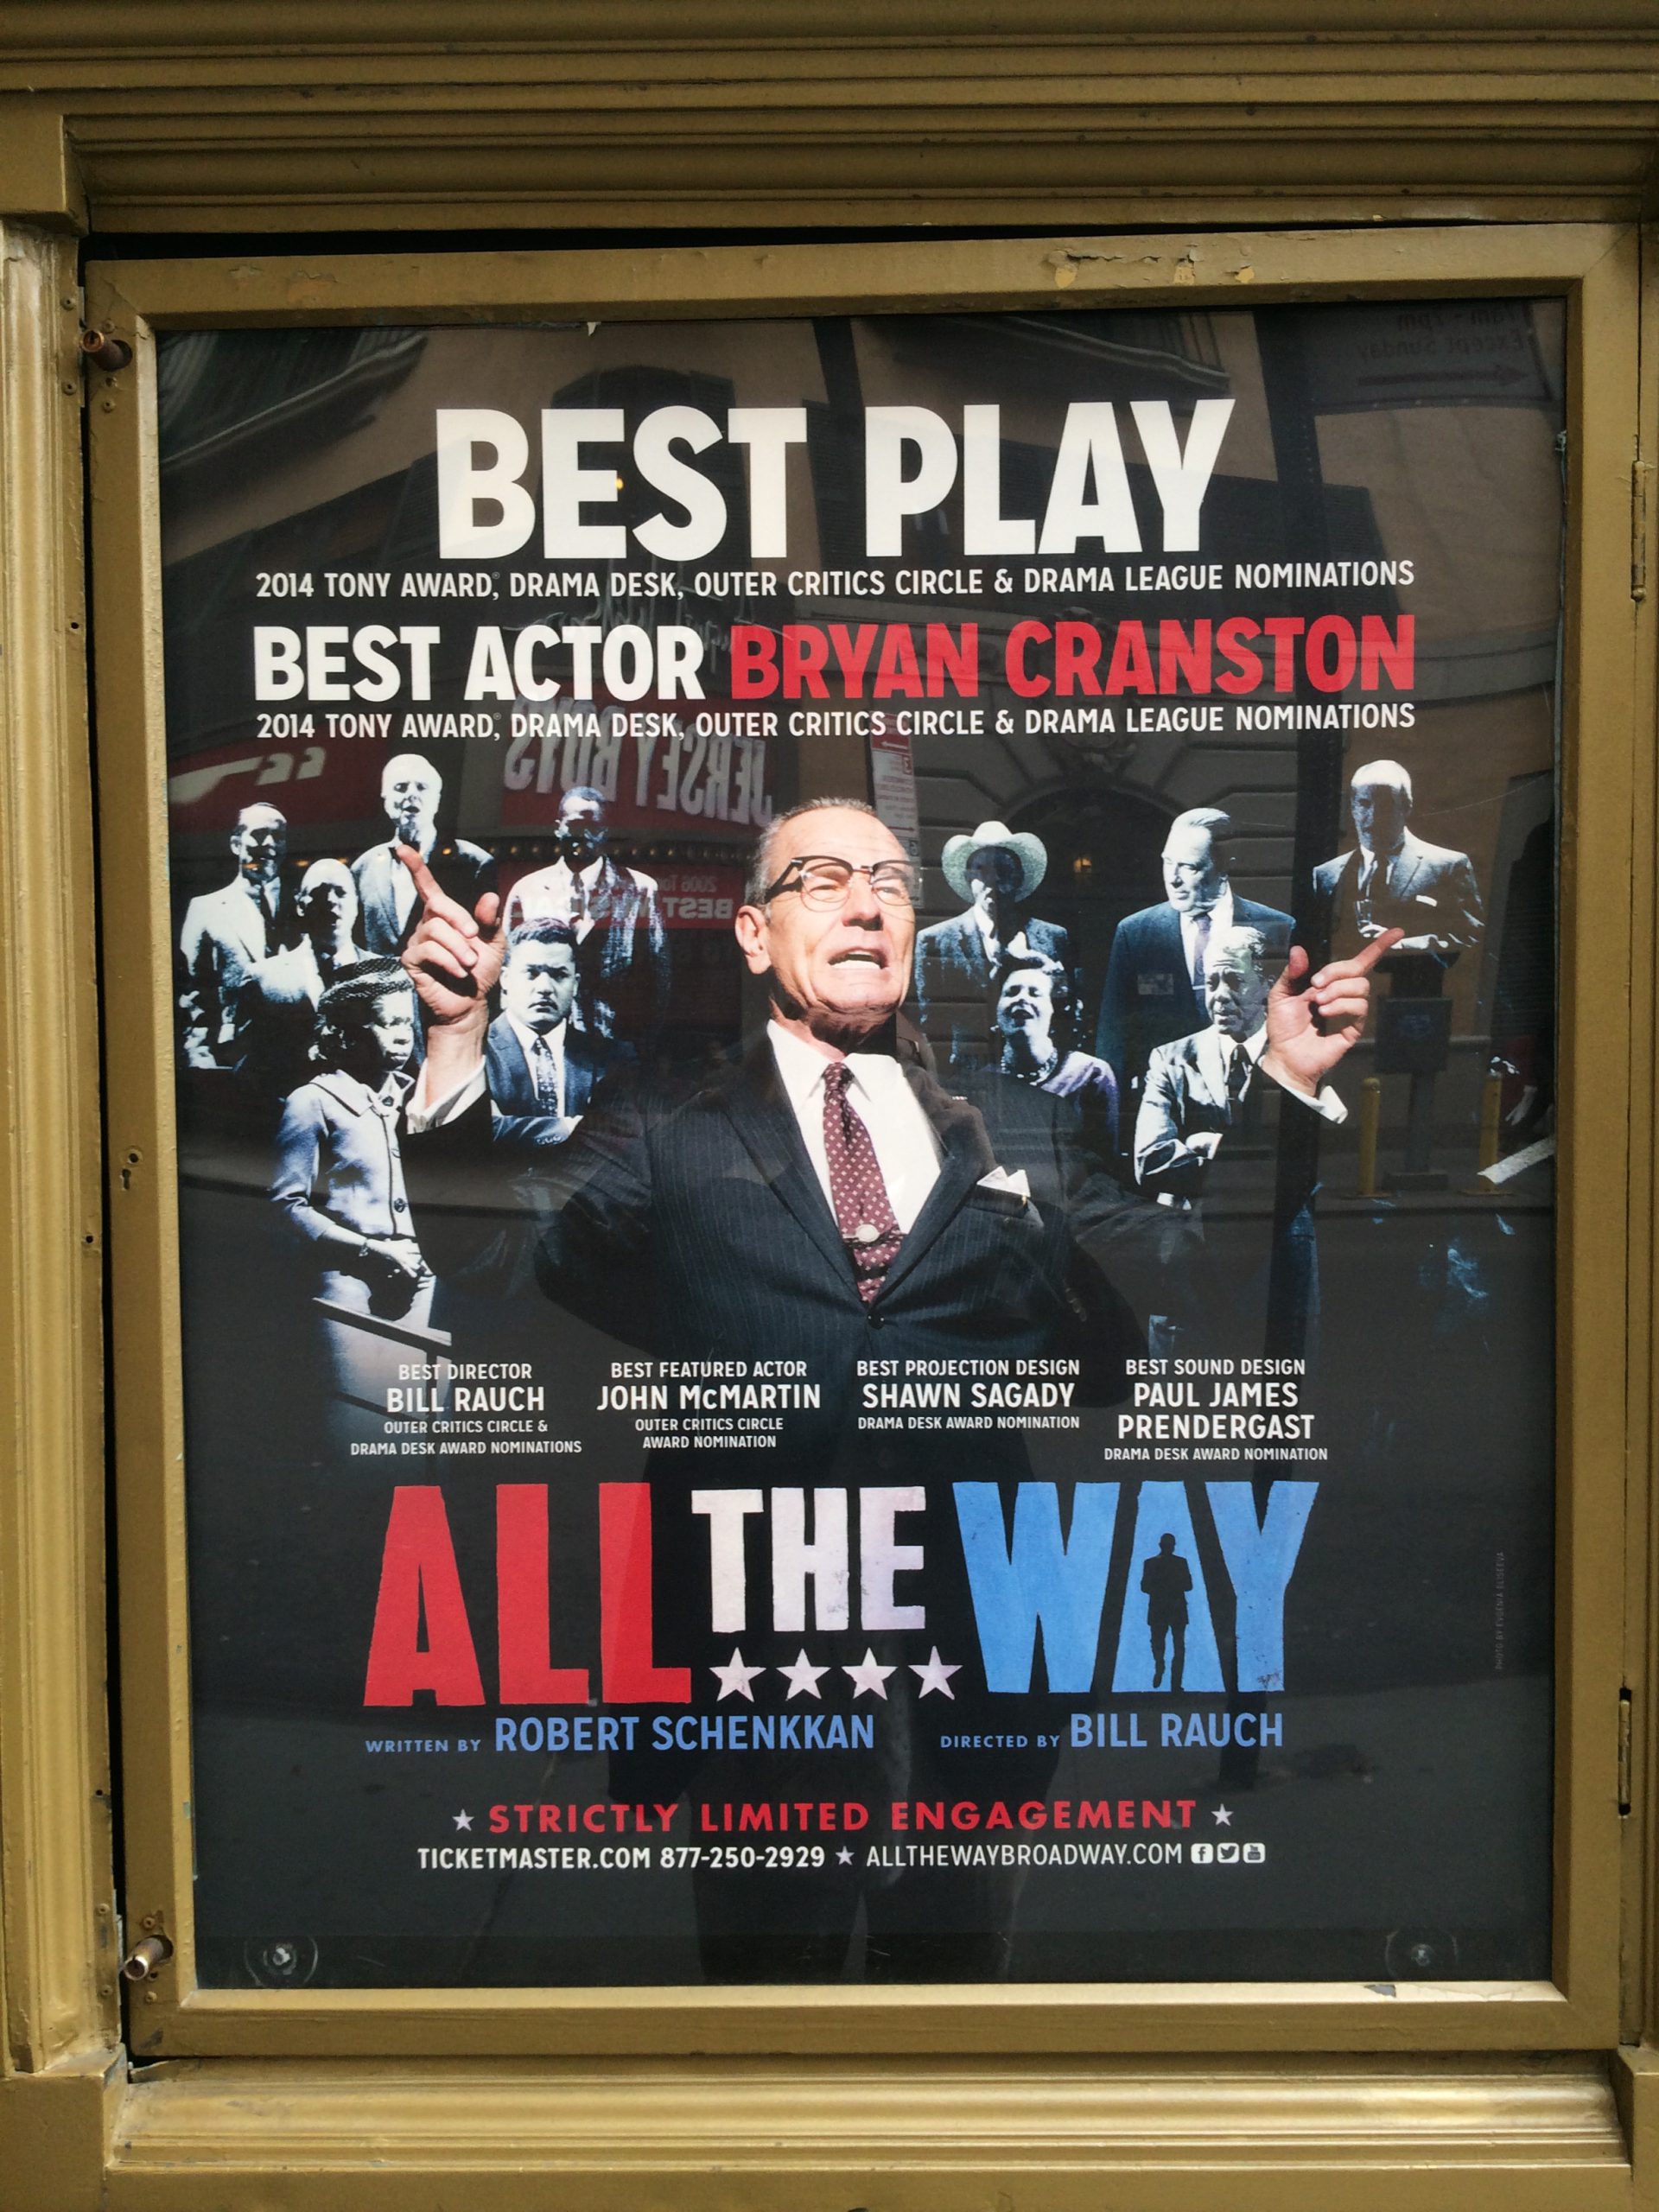 All the Way poster with Bryan Cranston